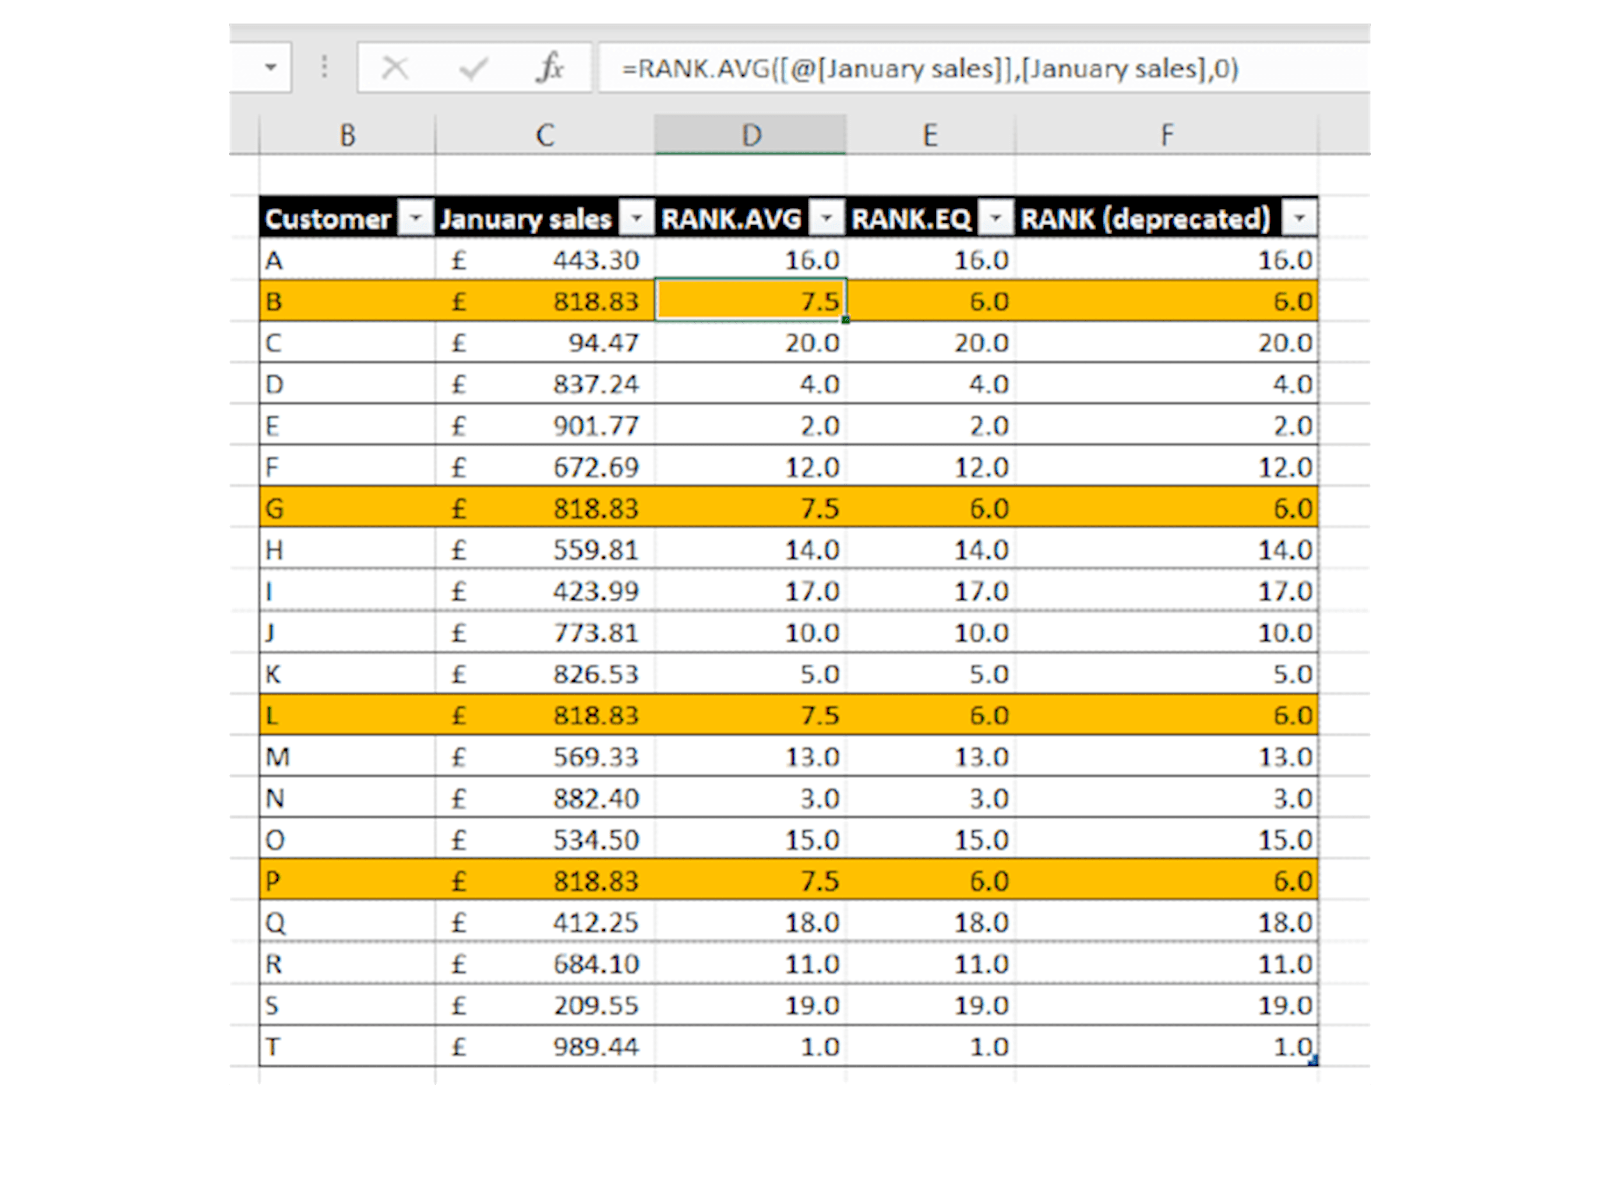 Image of an Excel full ranking